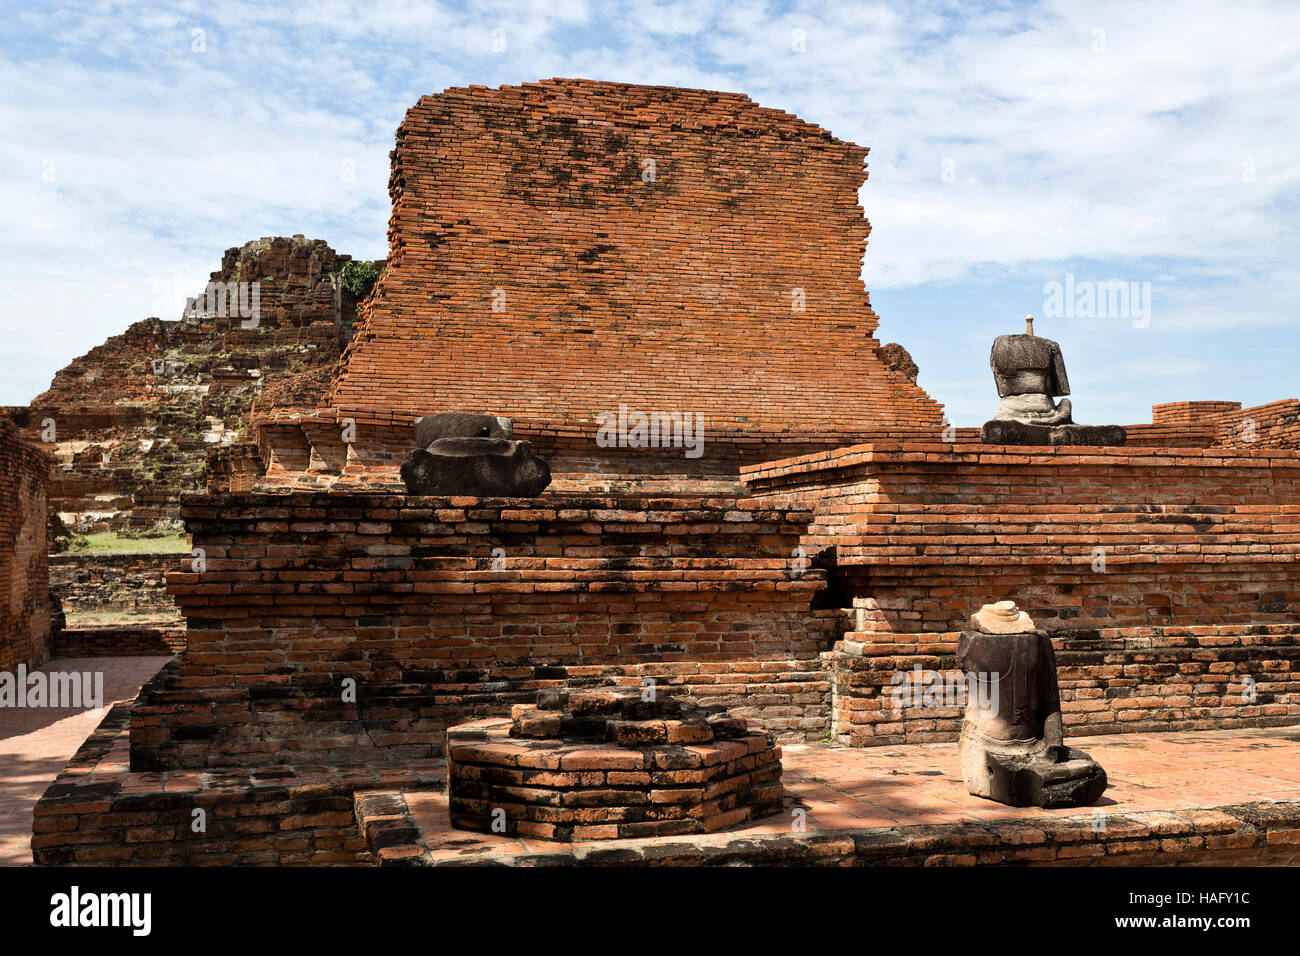 Ruins of the red brick temple of Wat Mahathat, the Temple of the Great Relic, and the remains of some headless Buddha statues, in Ayutthaya, Thailand Stock Photo